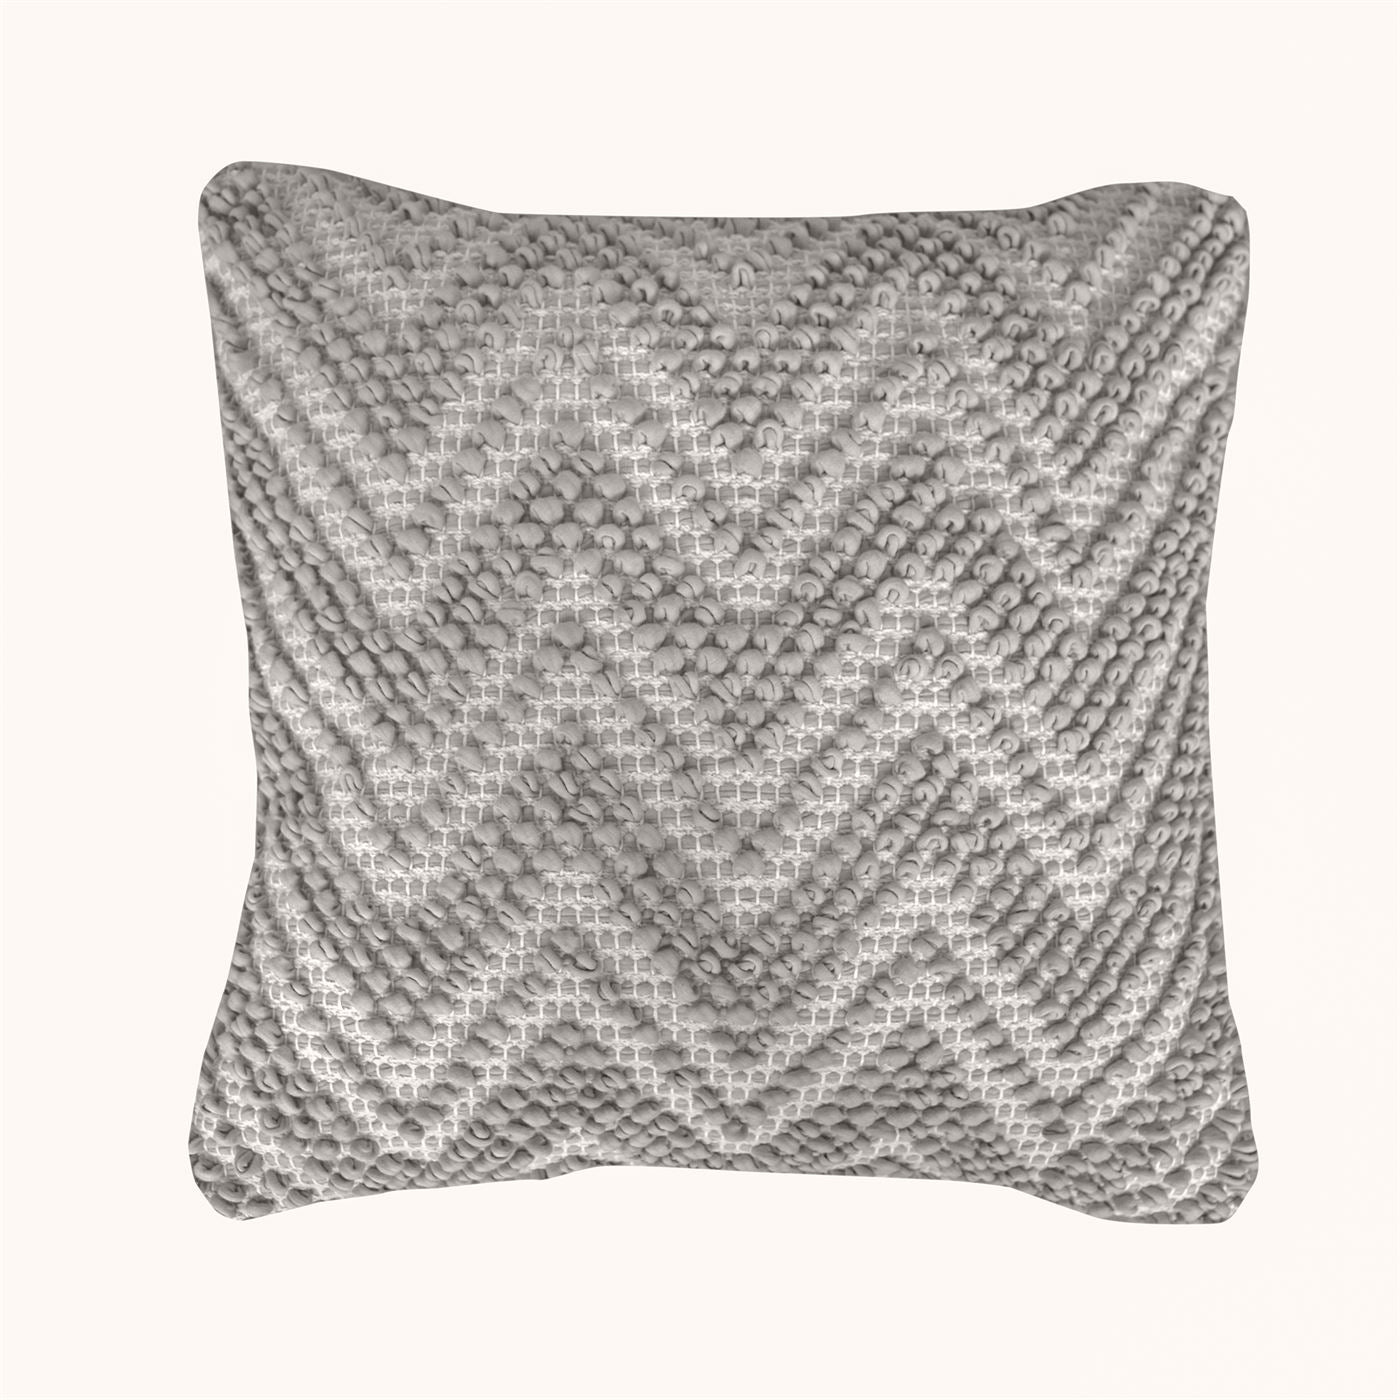 Pedro Pillow, Cotton Rag, Taupe, Pitloom, All Loop